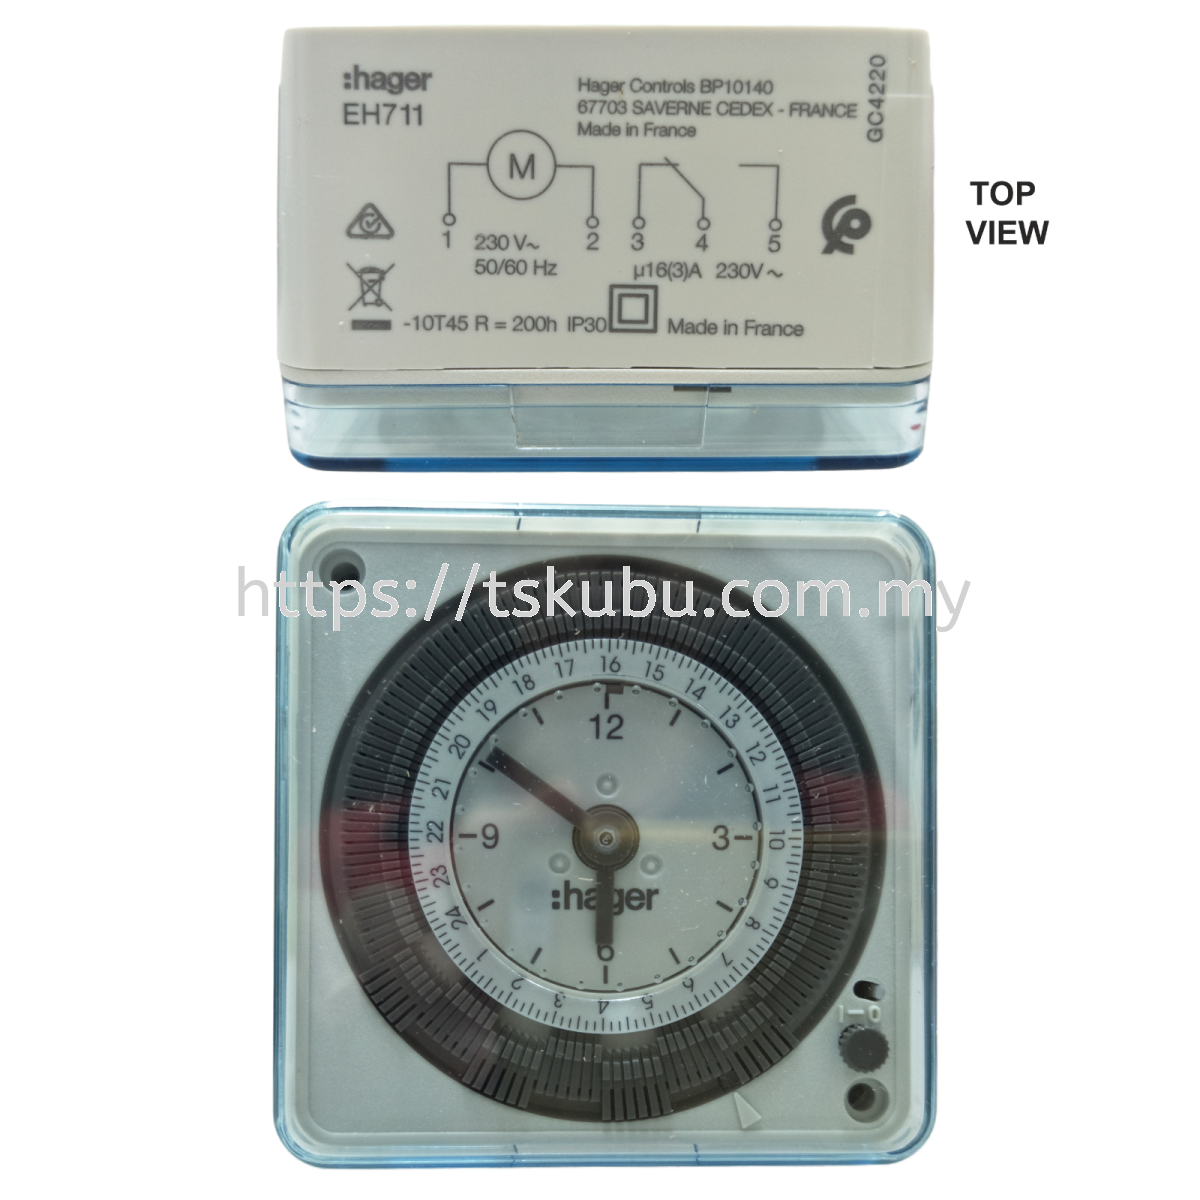 38797310 HAGER (EH-711) TIMER AND SENSOR ELECTRICAL COMPONENTS ELECTRICAL &  WIRING Melaka, Malaysia Supplier, Retailer,